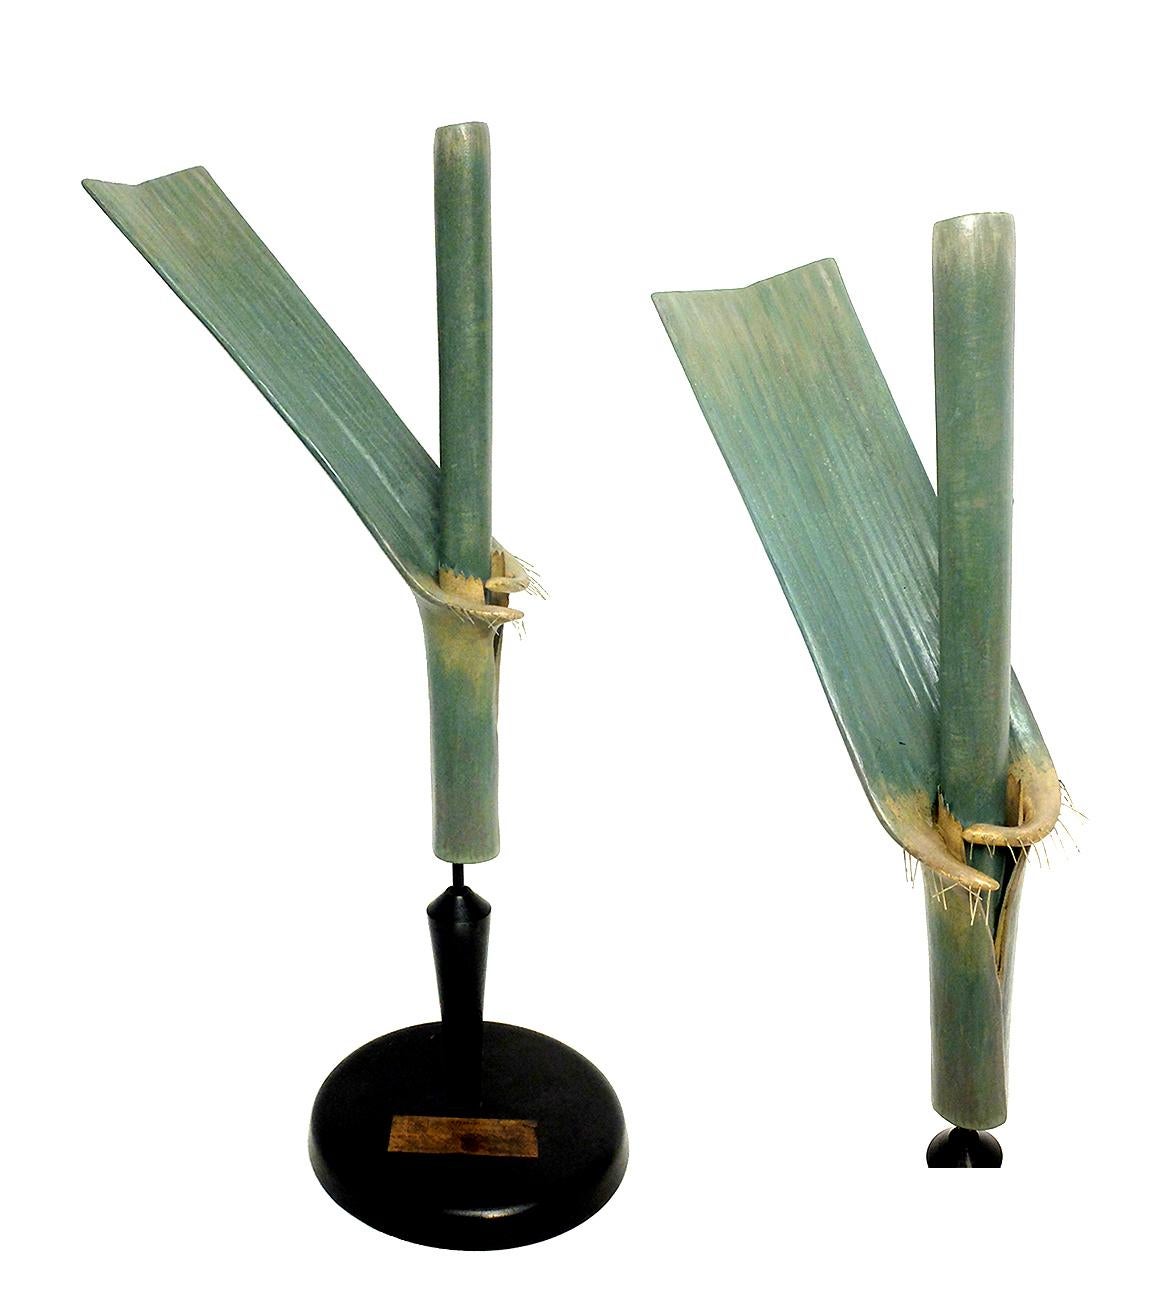 A rare botanic didactical specimen depicting a Bamboo plant grey-green color made out of papier-mâché, wood, and metal with black wooden base hand-painted. Extremely detailed. Osterloh modell, Germany, circa 1890.